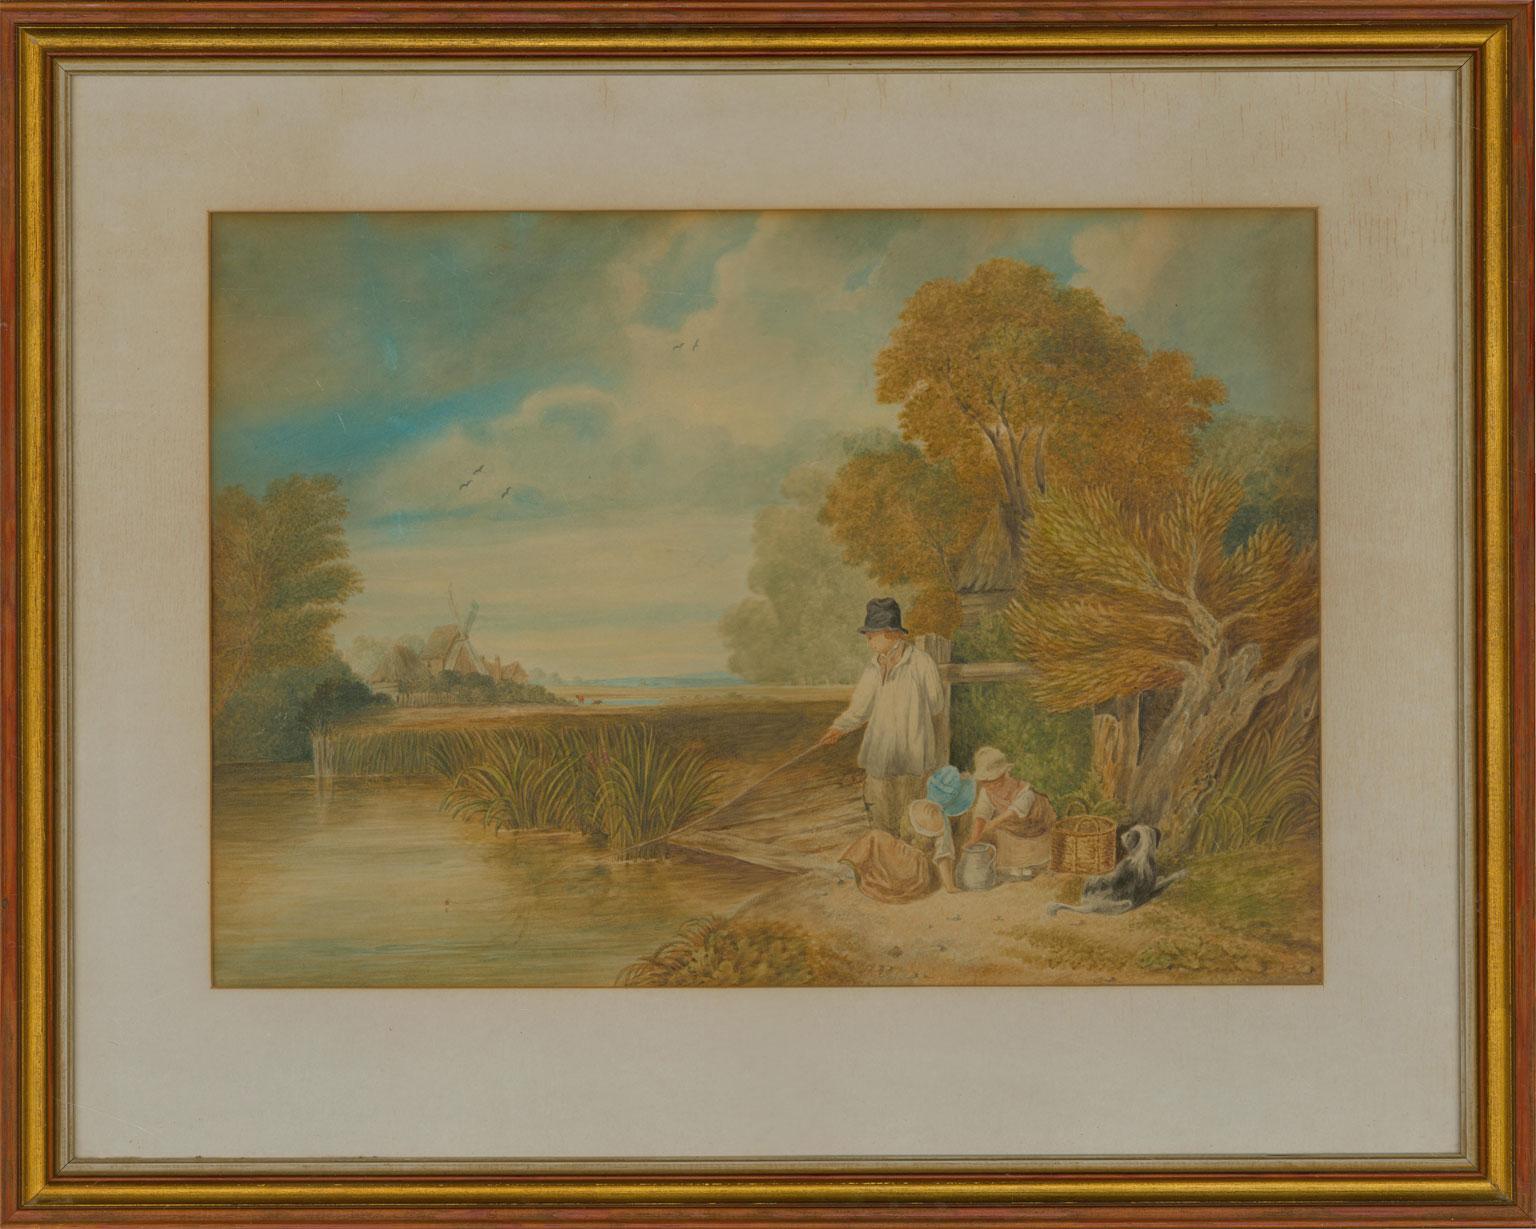 Unknown Landscape Art - Framed 19th Century Watercolour - Tranquil Fishing in the Countryside